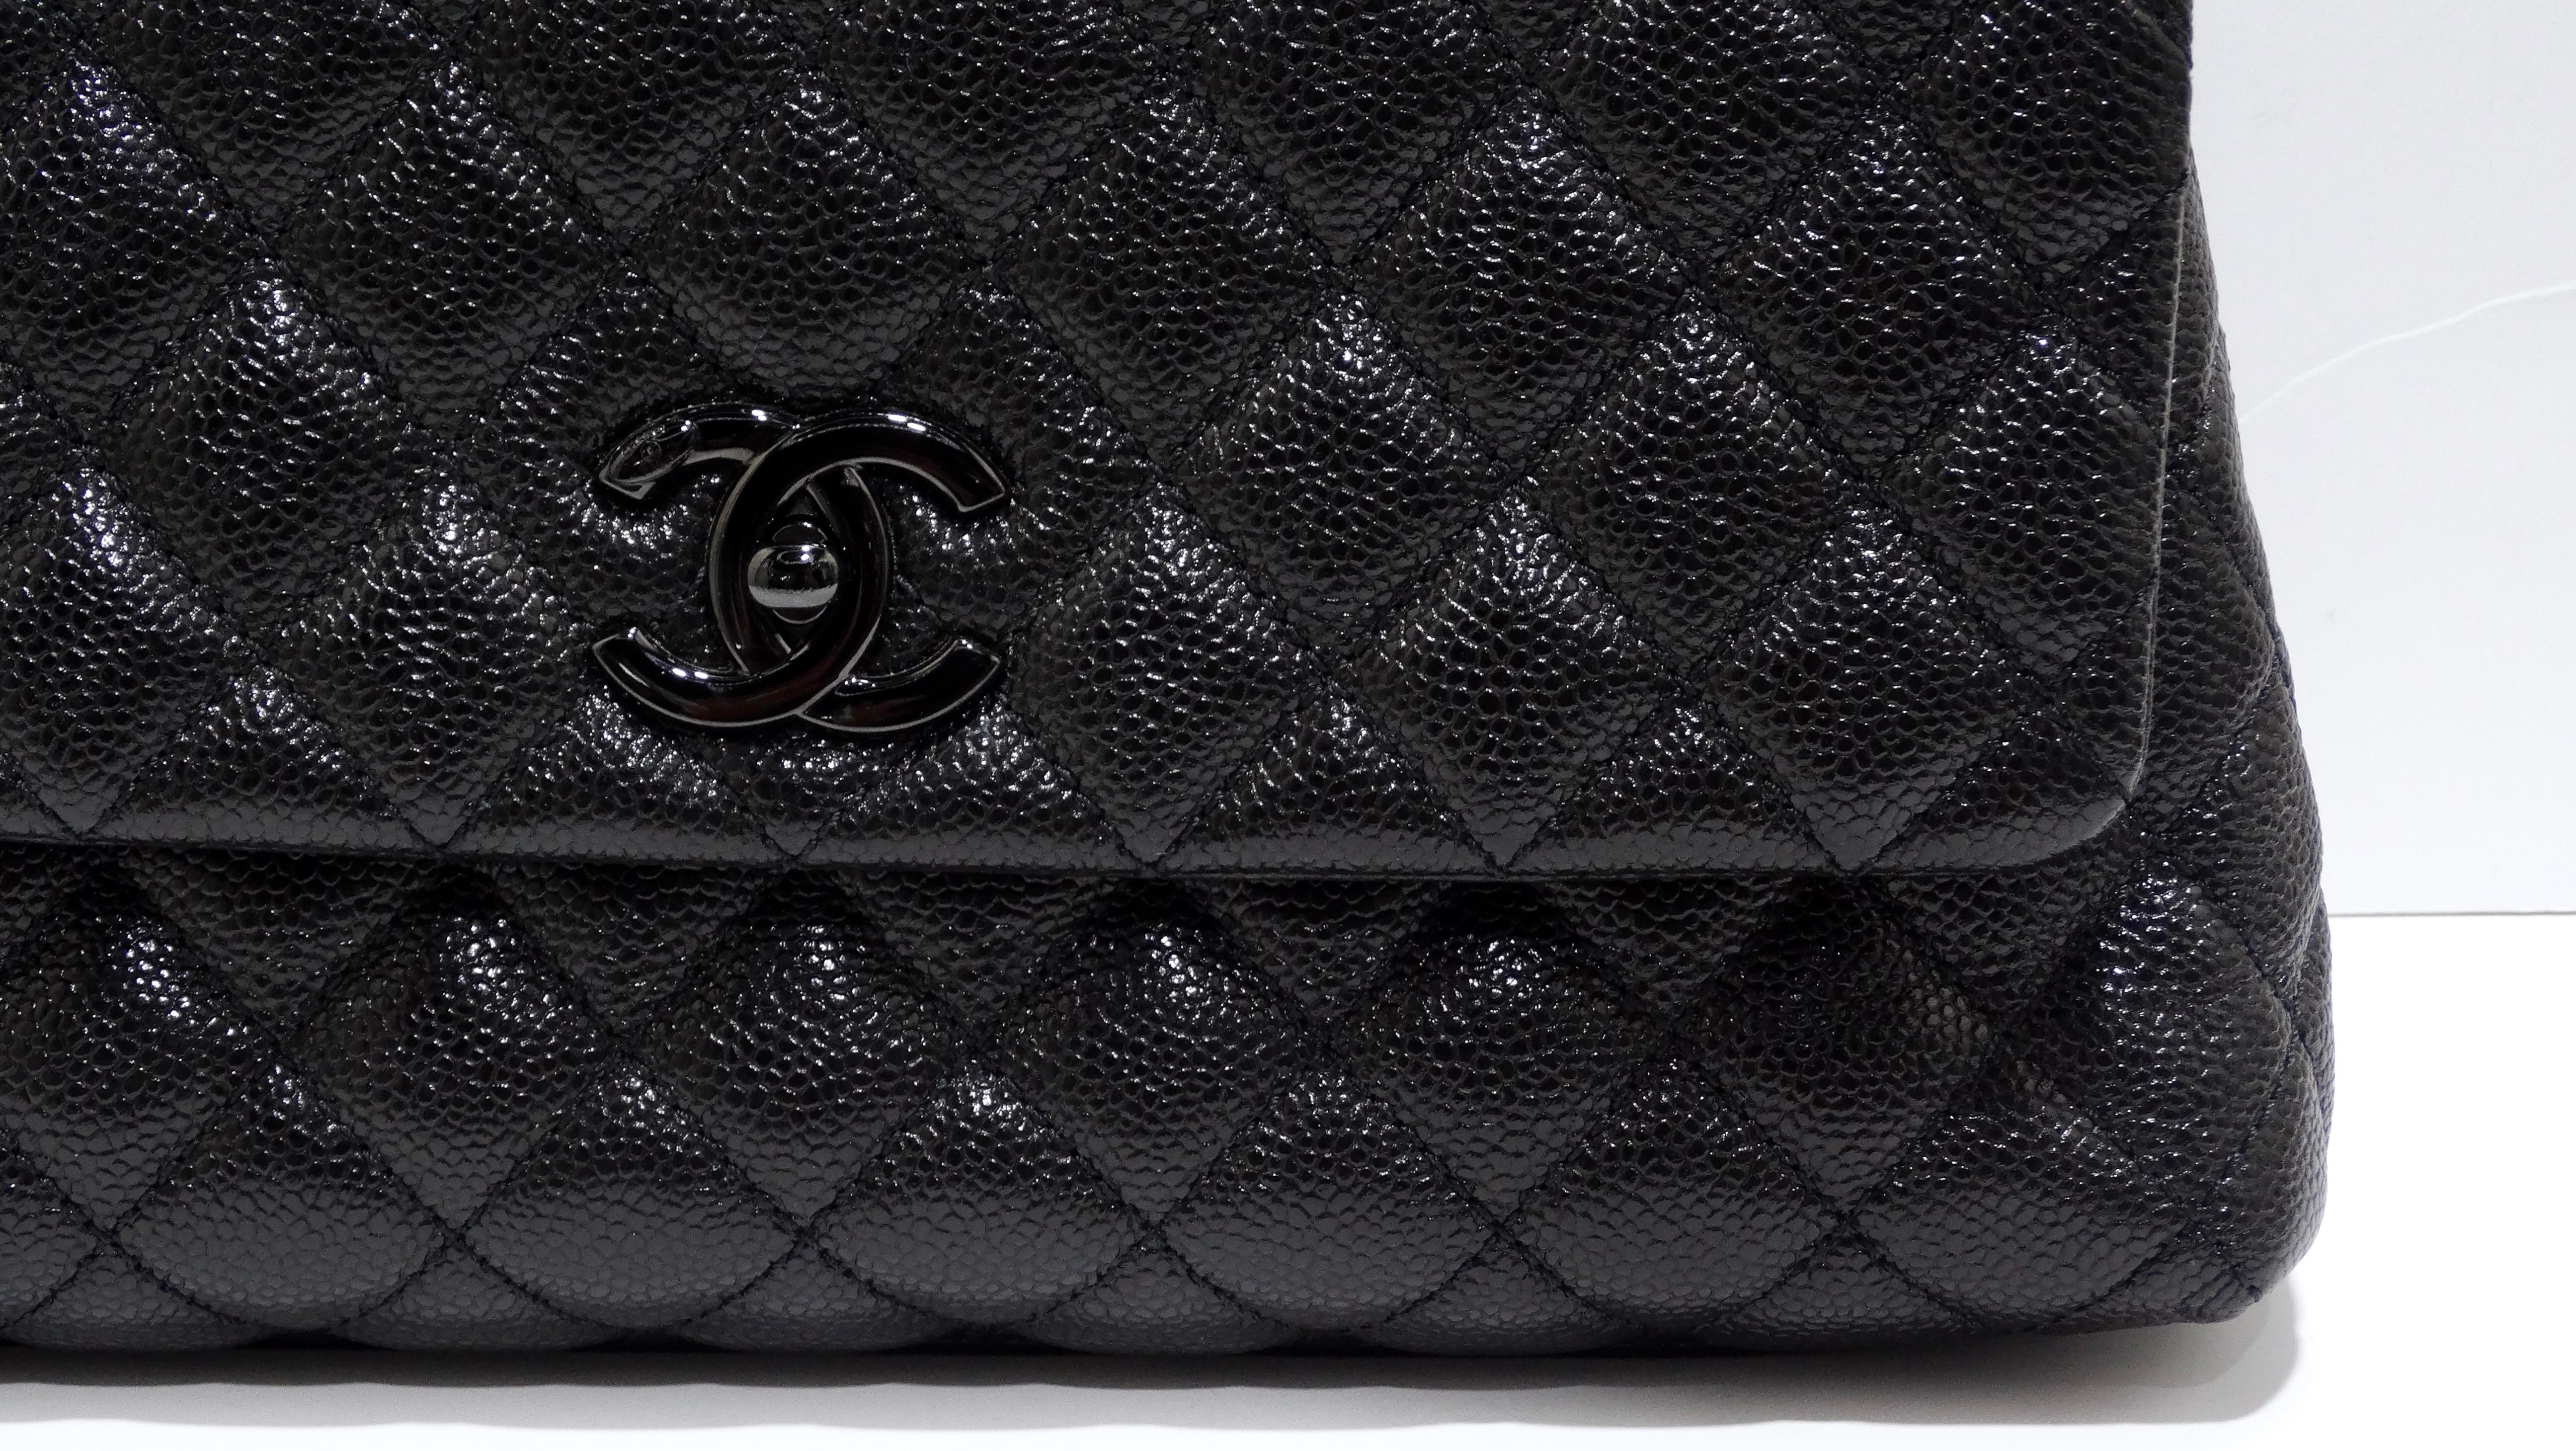 SEXY and SLEEK Chanel! From the wonderful and iconic Karl Lagerfeld, this is an authentic CHANEL Caviar Quilted Mini Coco Handle Flap in So Black. This chic tote is crafted of quilted black caviar leather. This can be worn in so many ways